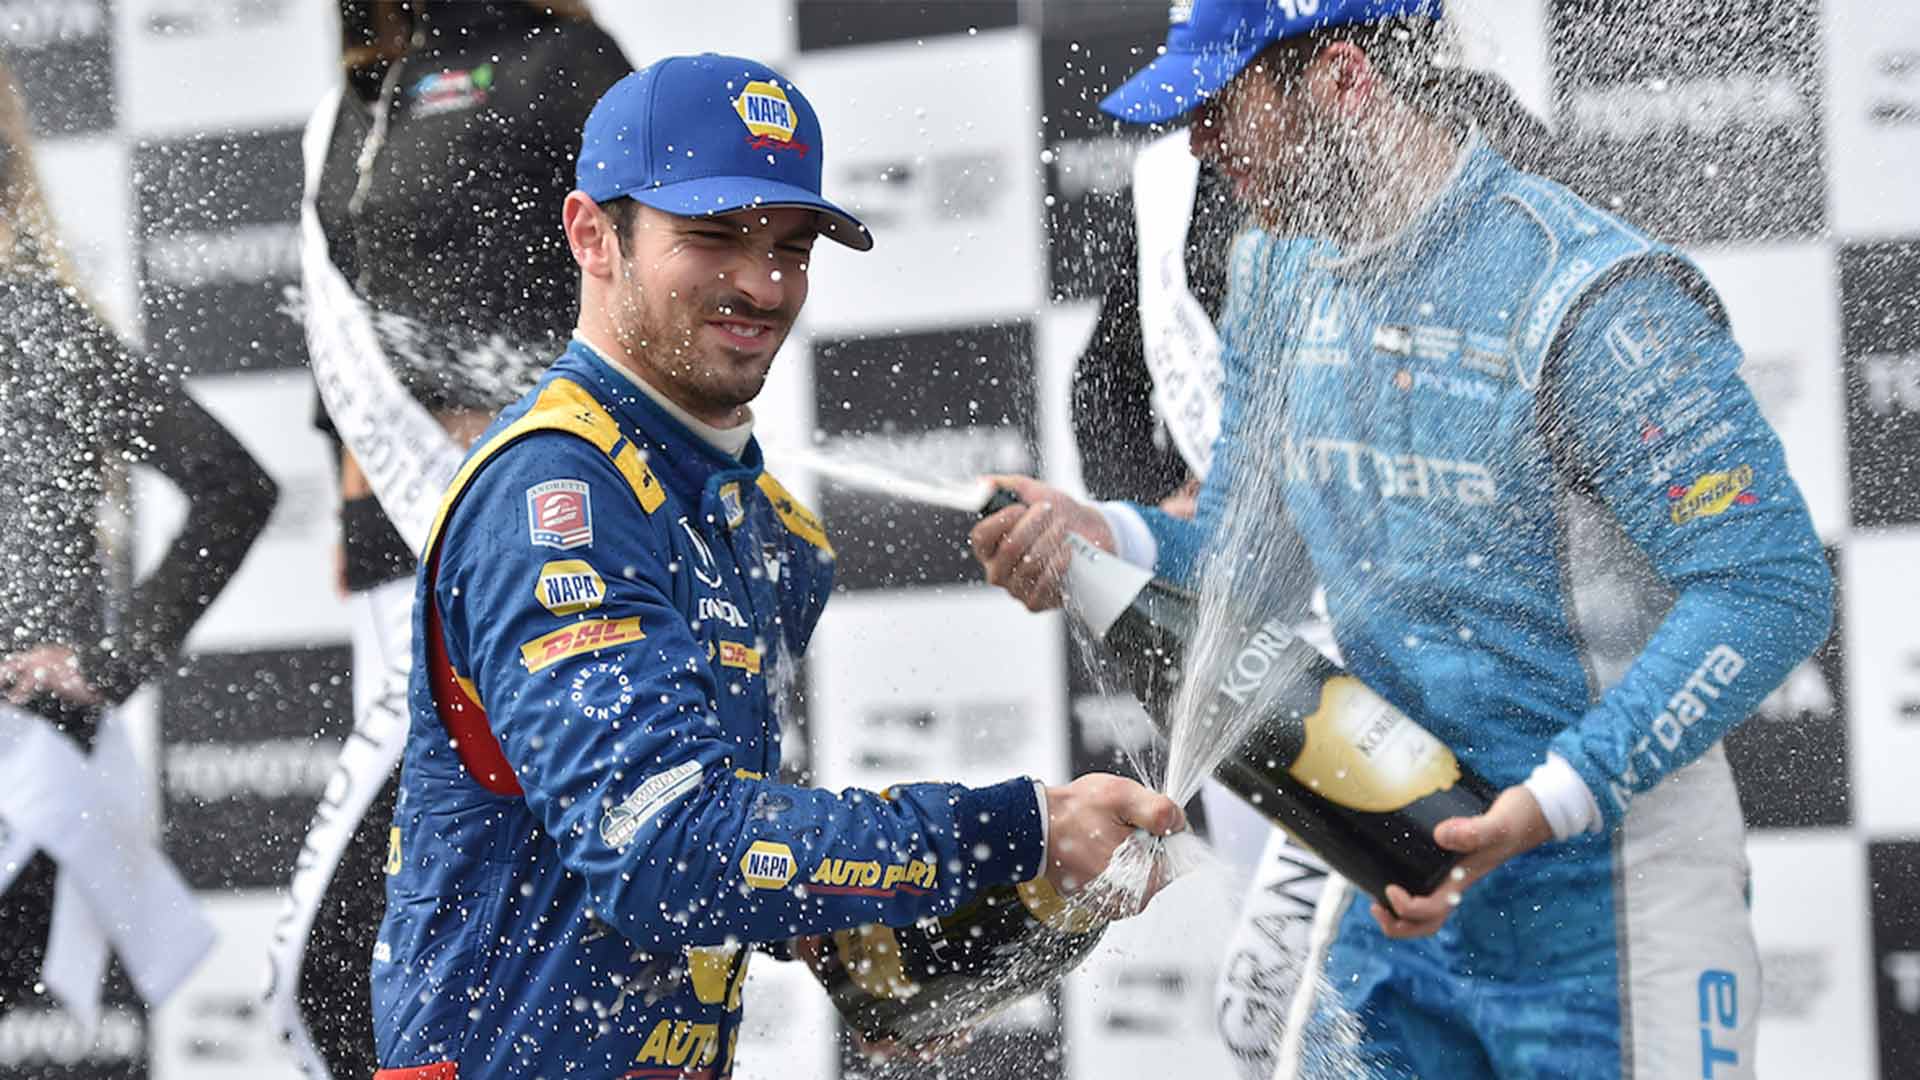 Alexander Rossi sprays the champagne in Victory Circle after winning the Toyota Grand Prix of Long Beach